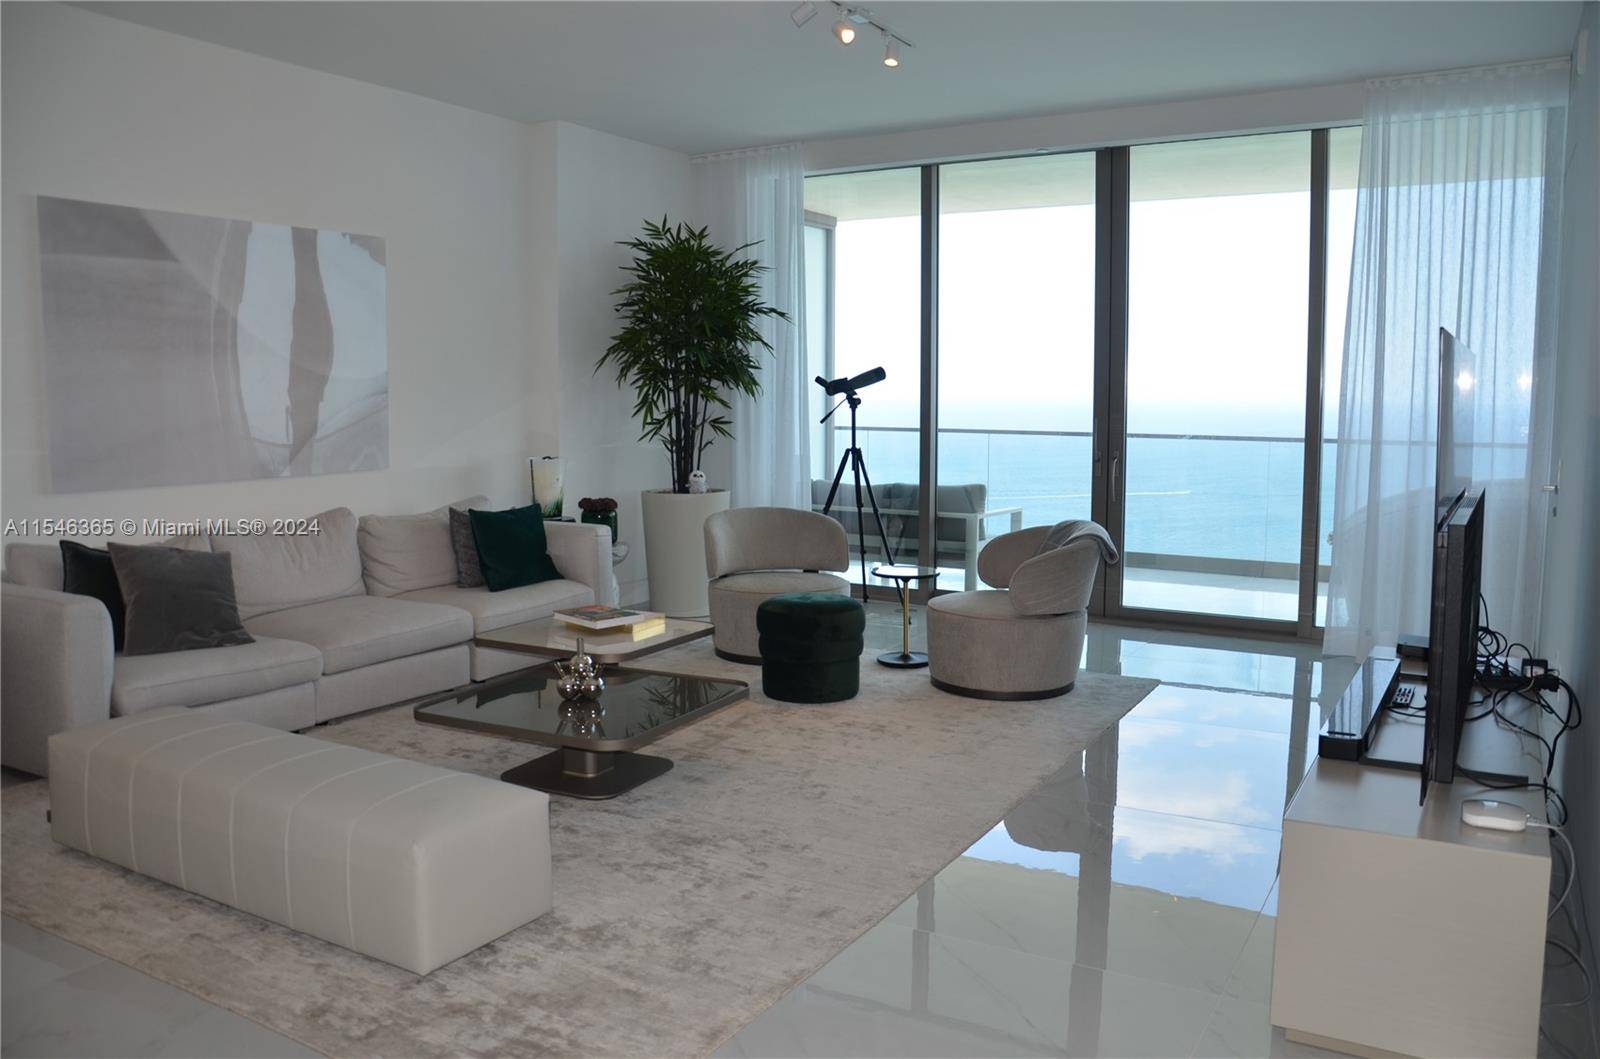 Enjoy this amaizing apartment in Armani Casa located in the heart of Sunny isles.